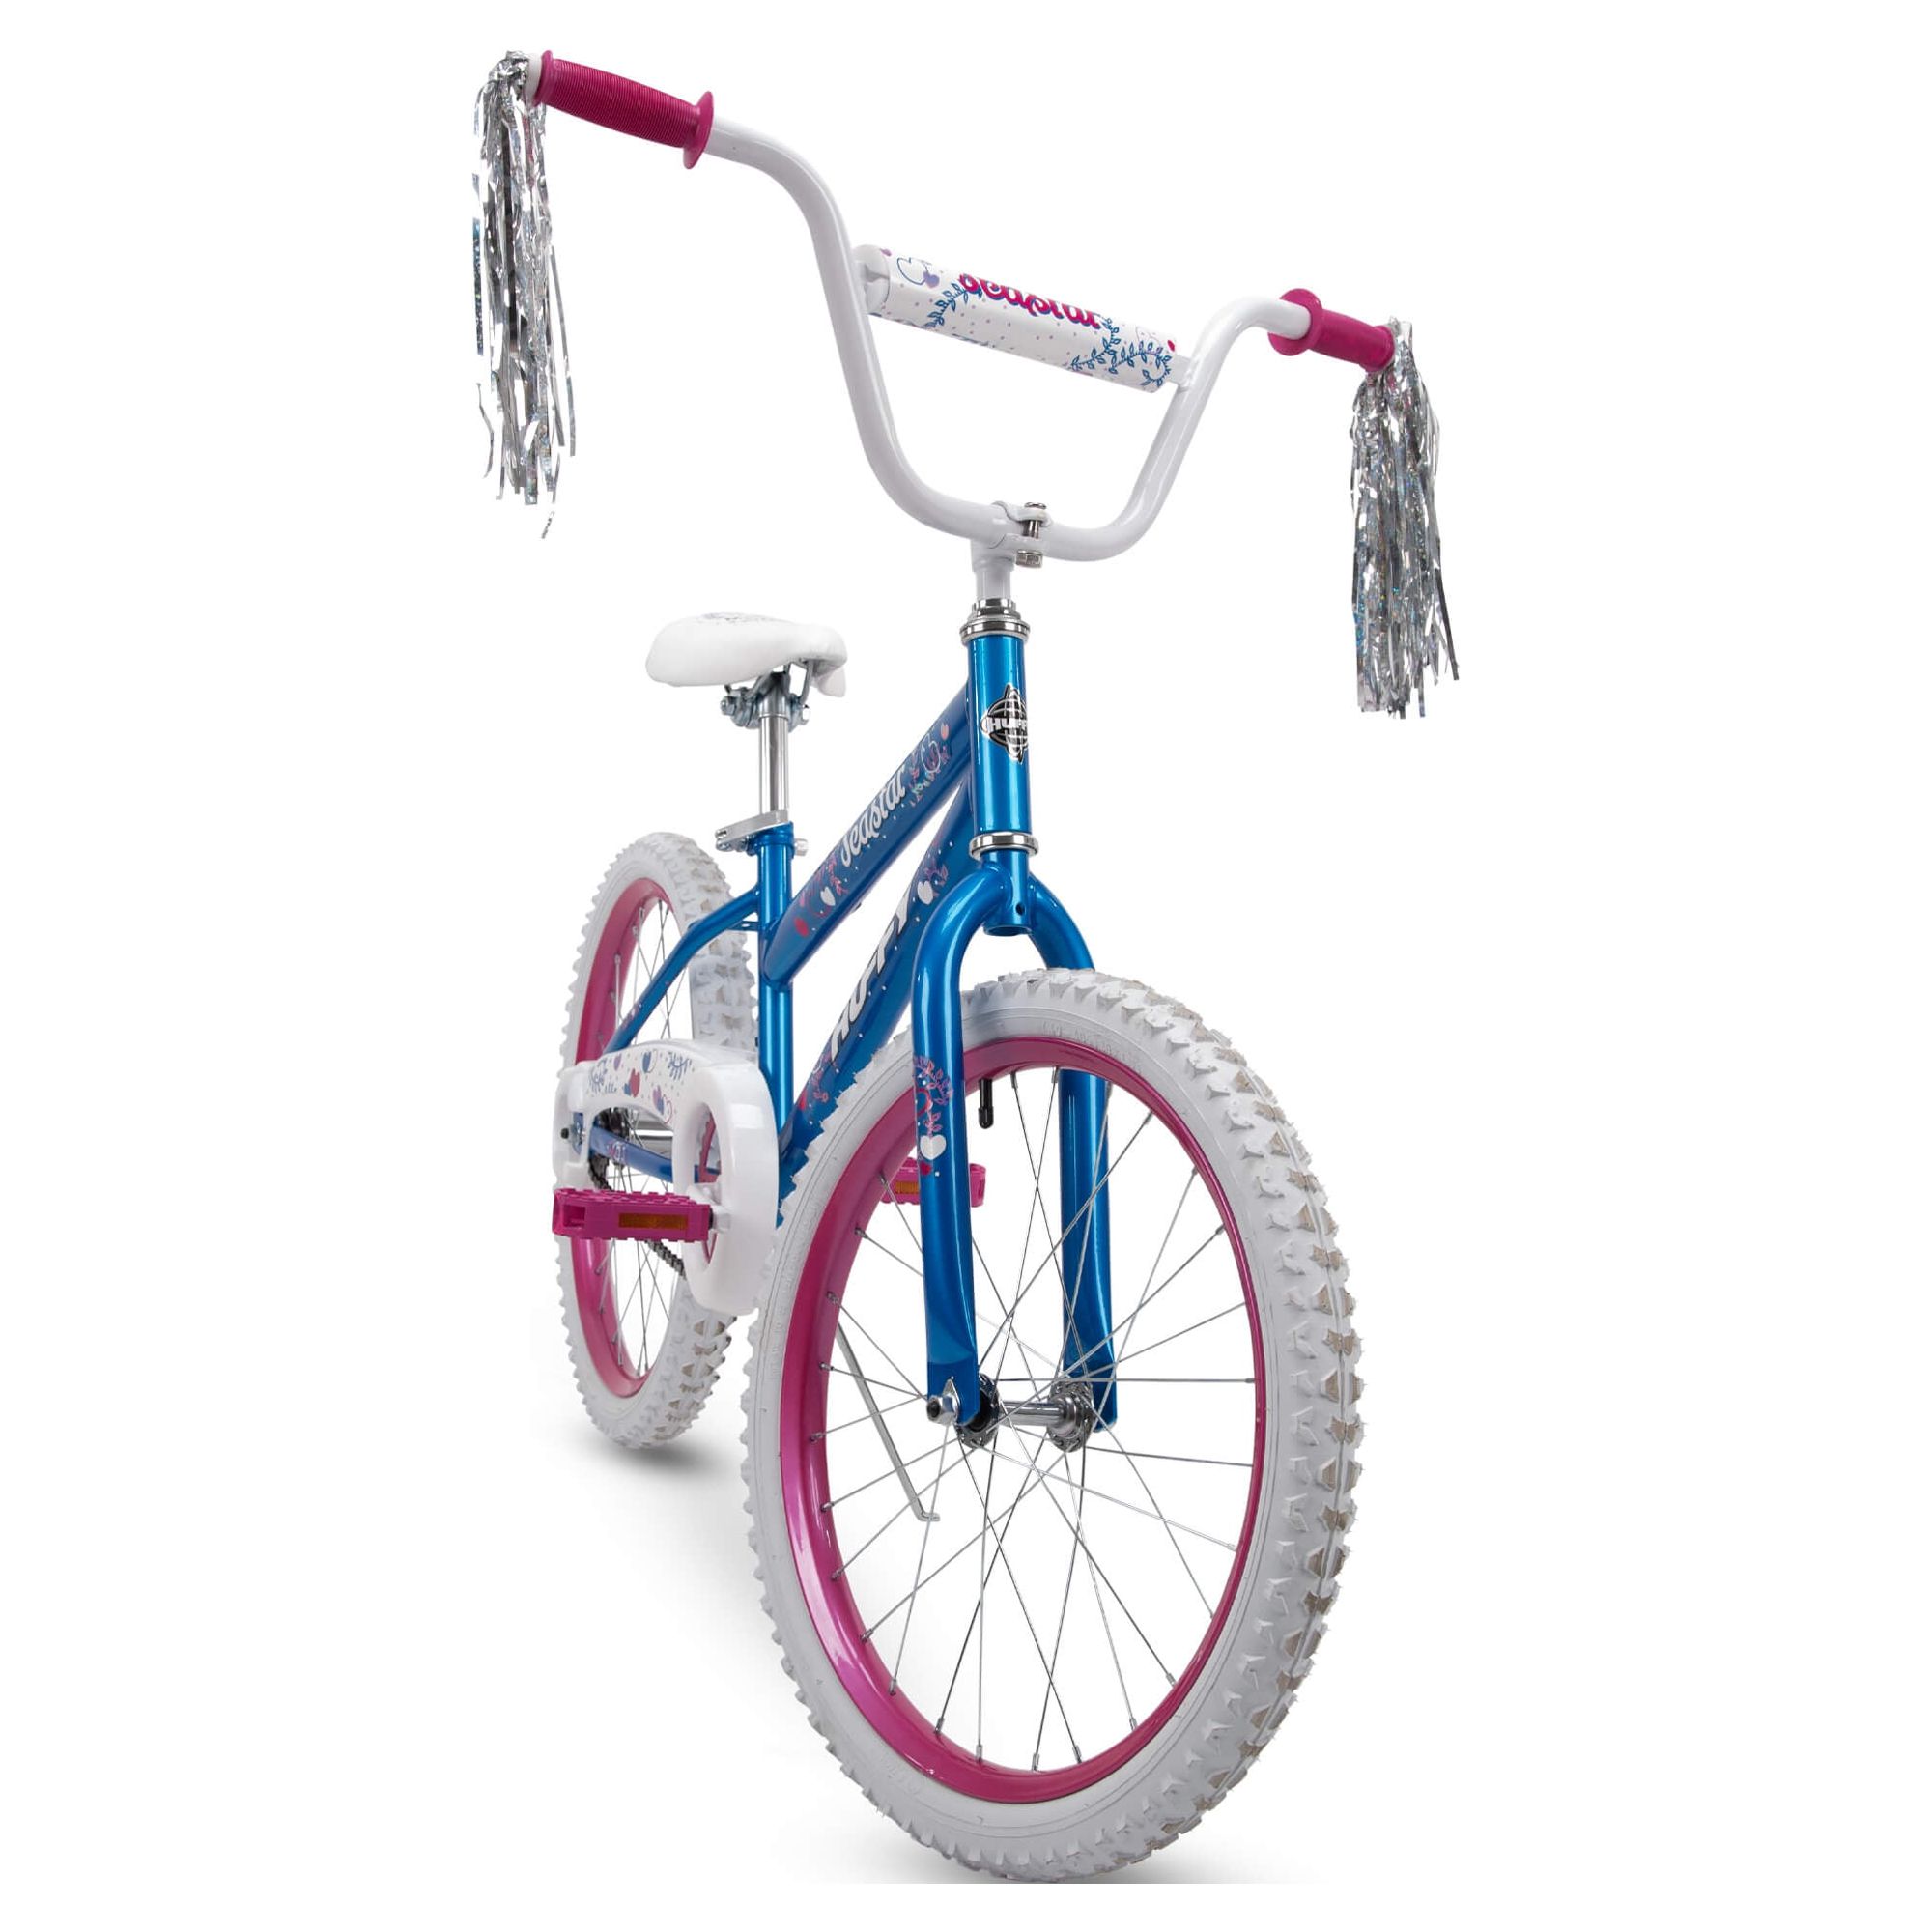 Huffy 20 in. Sea Star Kids Bike for Girls Ages 5 and up, Child, Blue and Pink - image 5 of 10